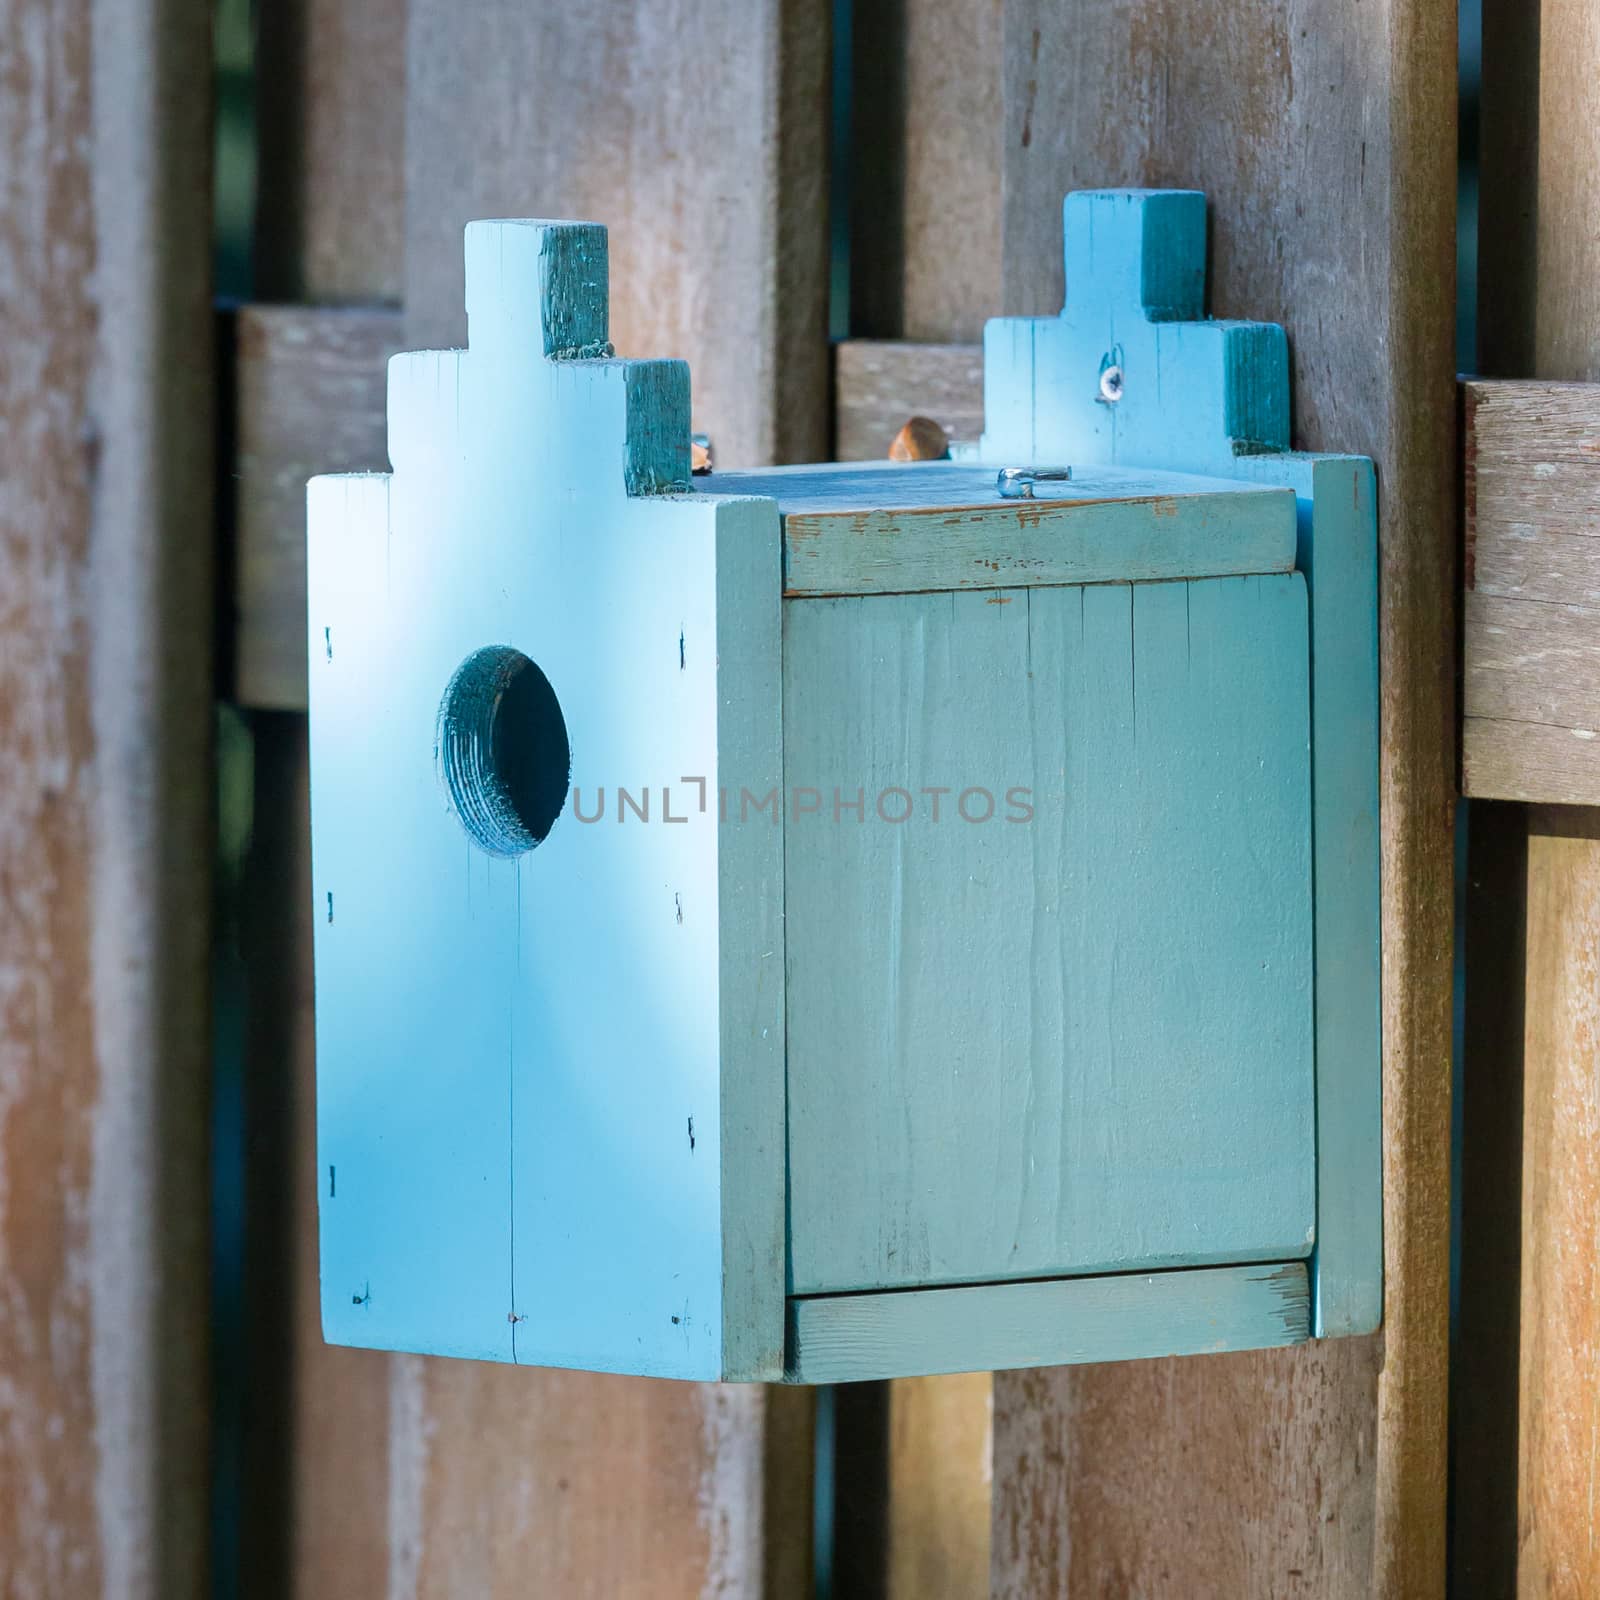 Blue birdhouse on a wooden fence in a garden